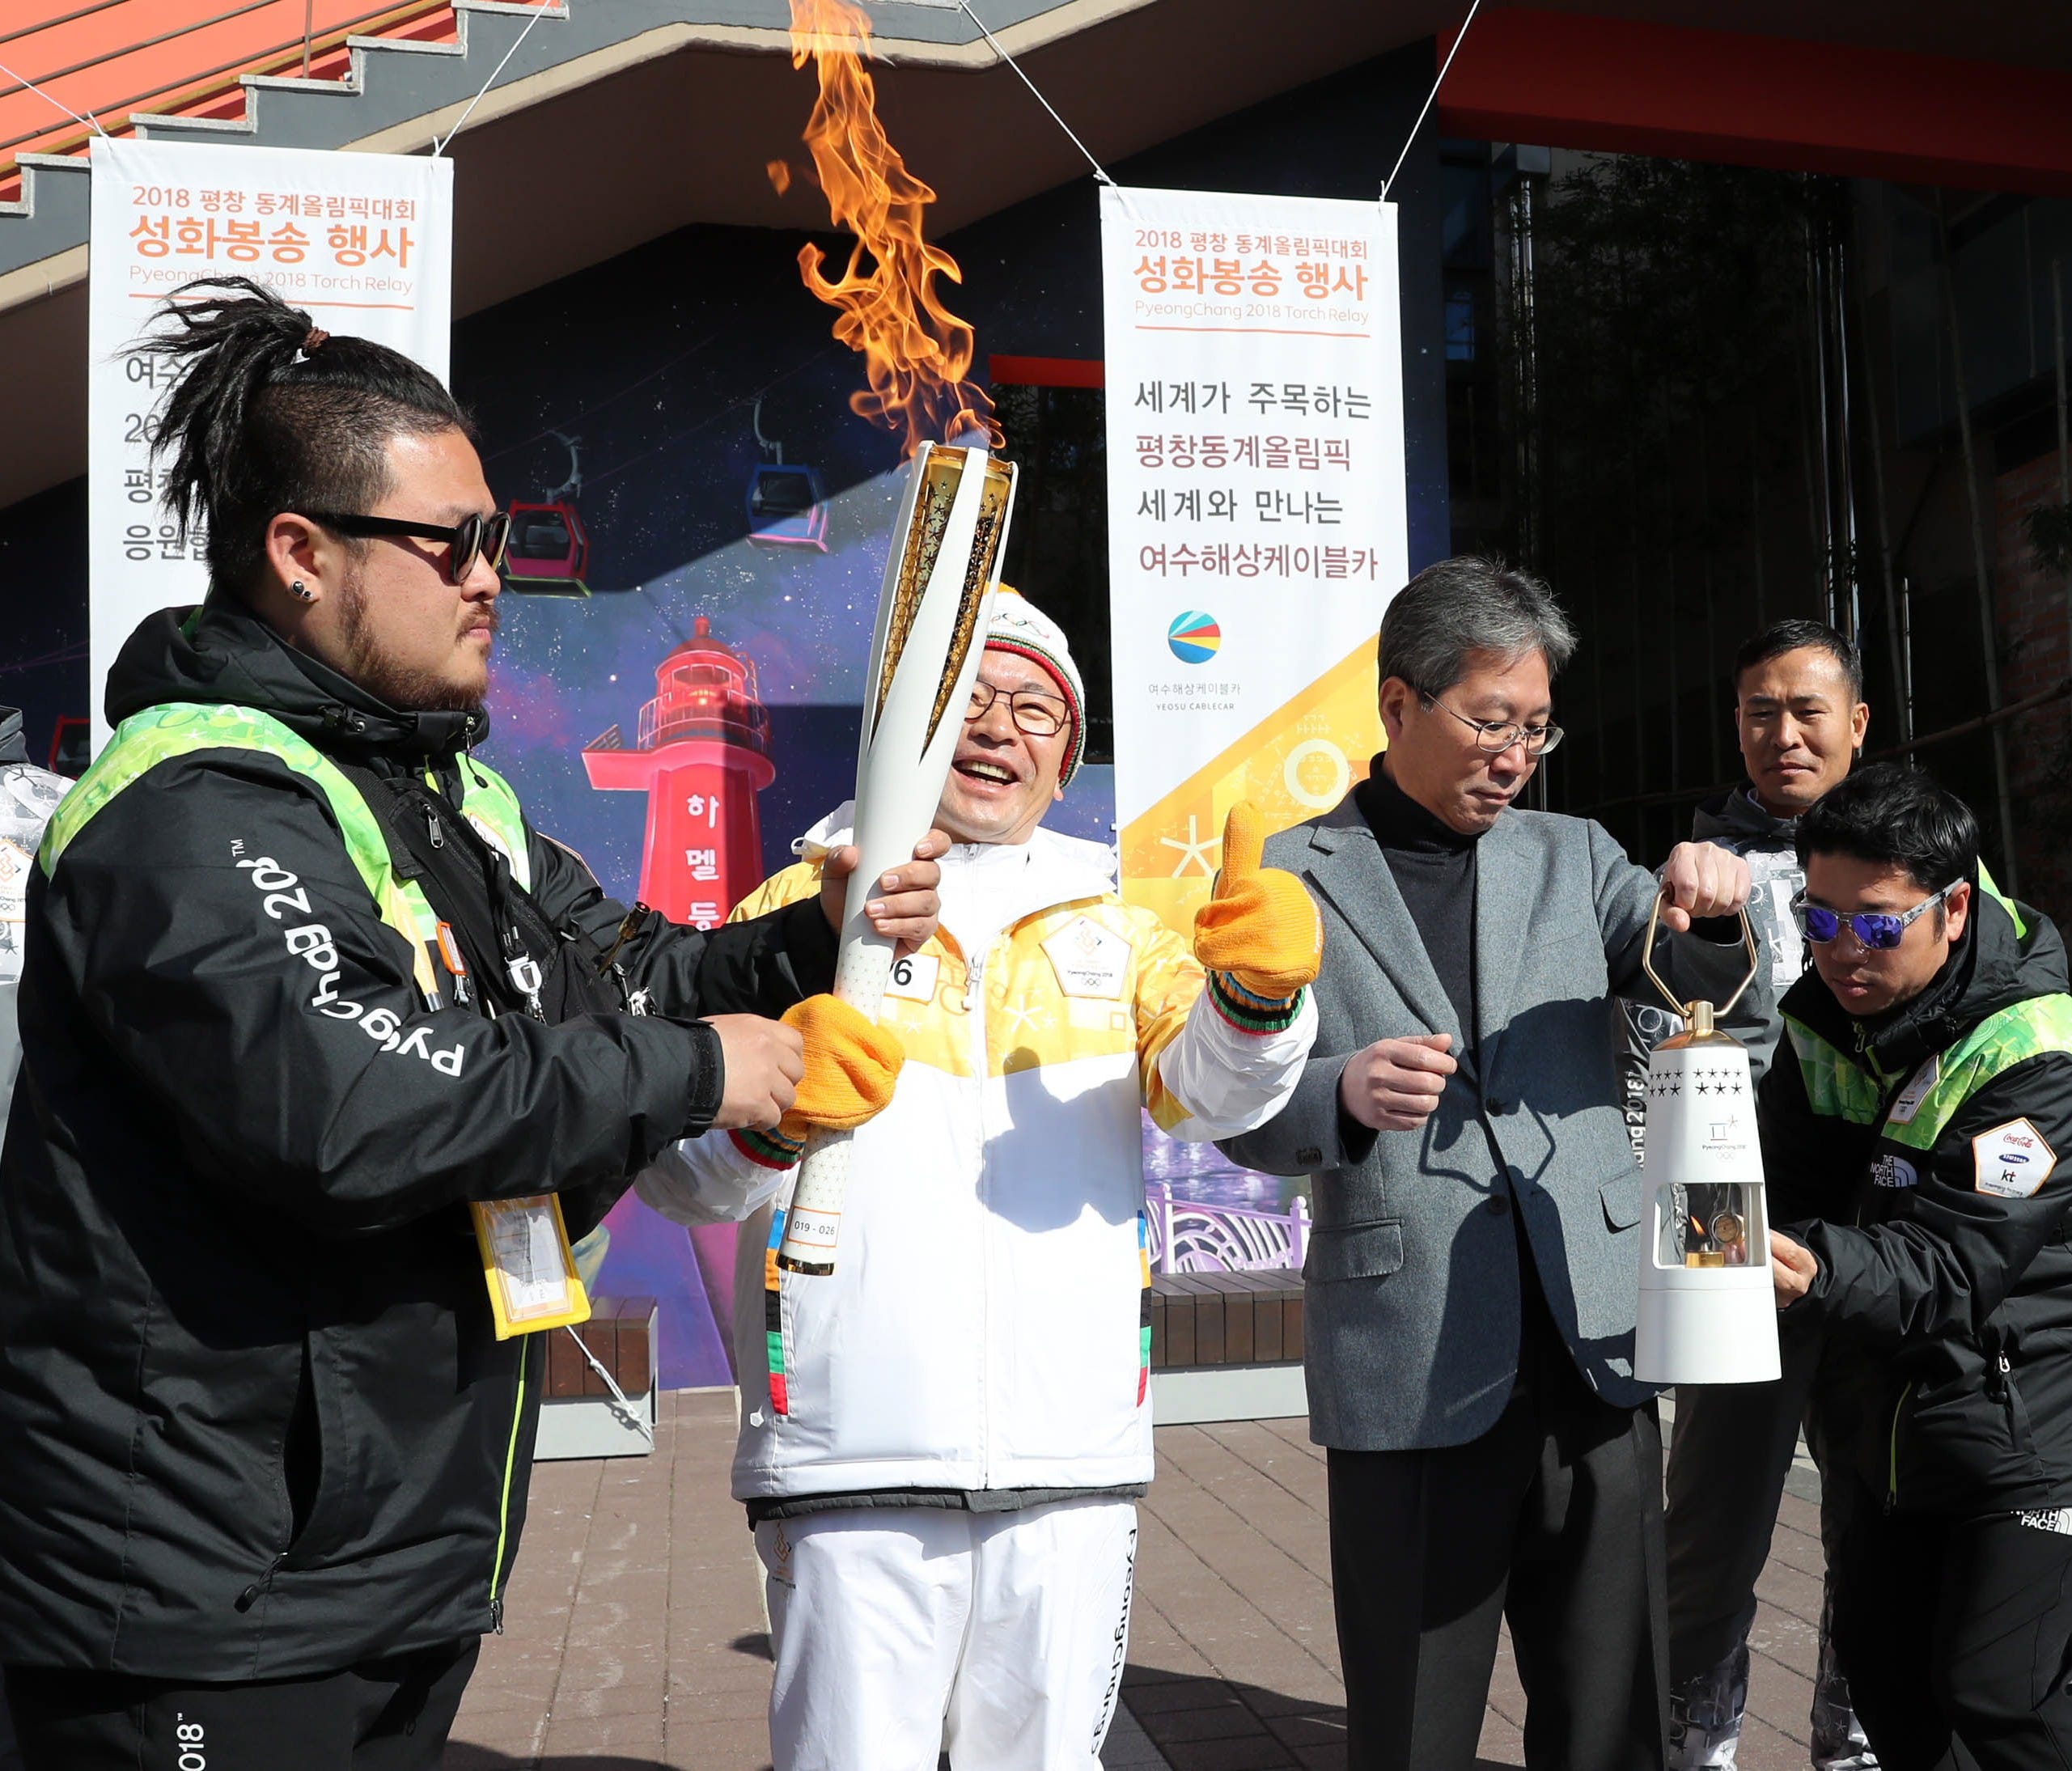 A ceremony takes place at a park in the southern port city of Yeosu, South Korea, on Nov. 19 2017, to mark the arrival of the 2018 PyeongChang Winter Olympics torch there as part of a nationwide relay.